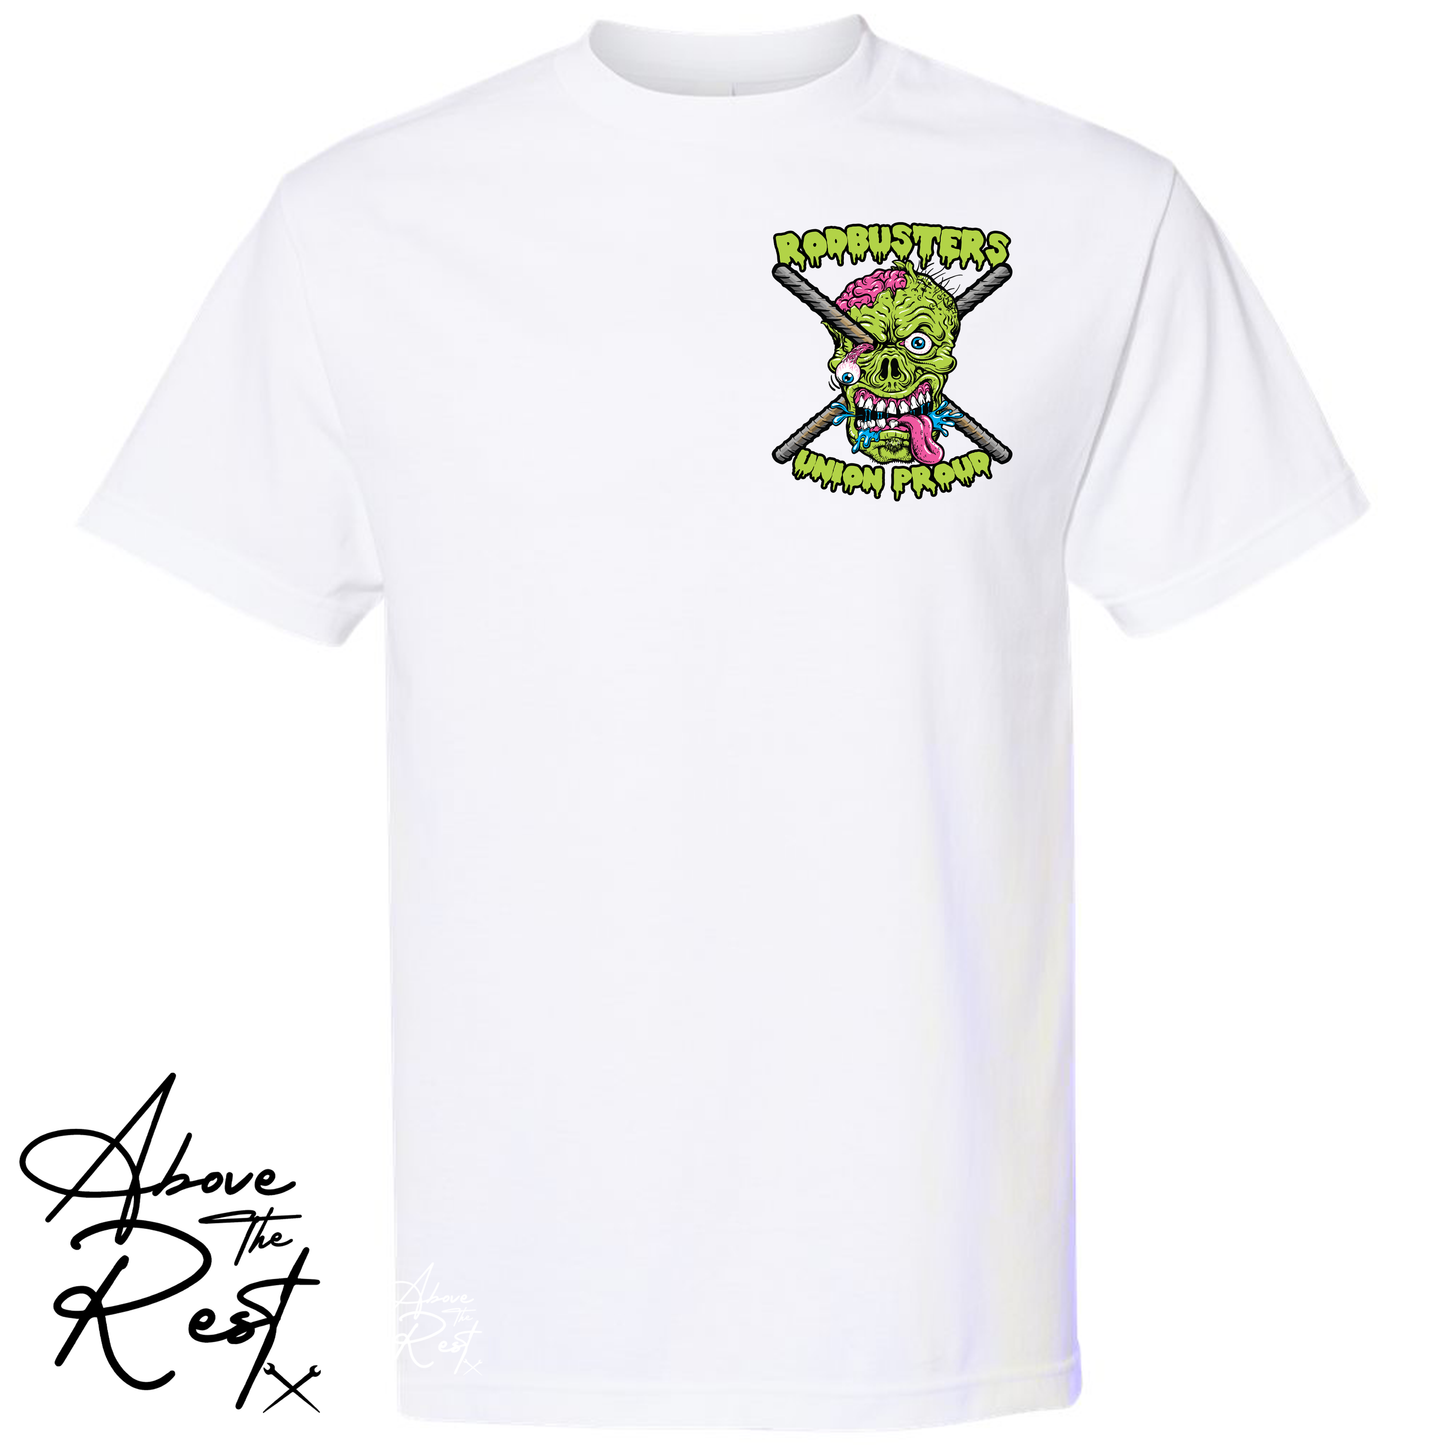 ZOMBIE RODBUSTER T-SHIRT